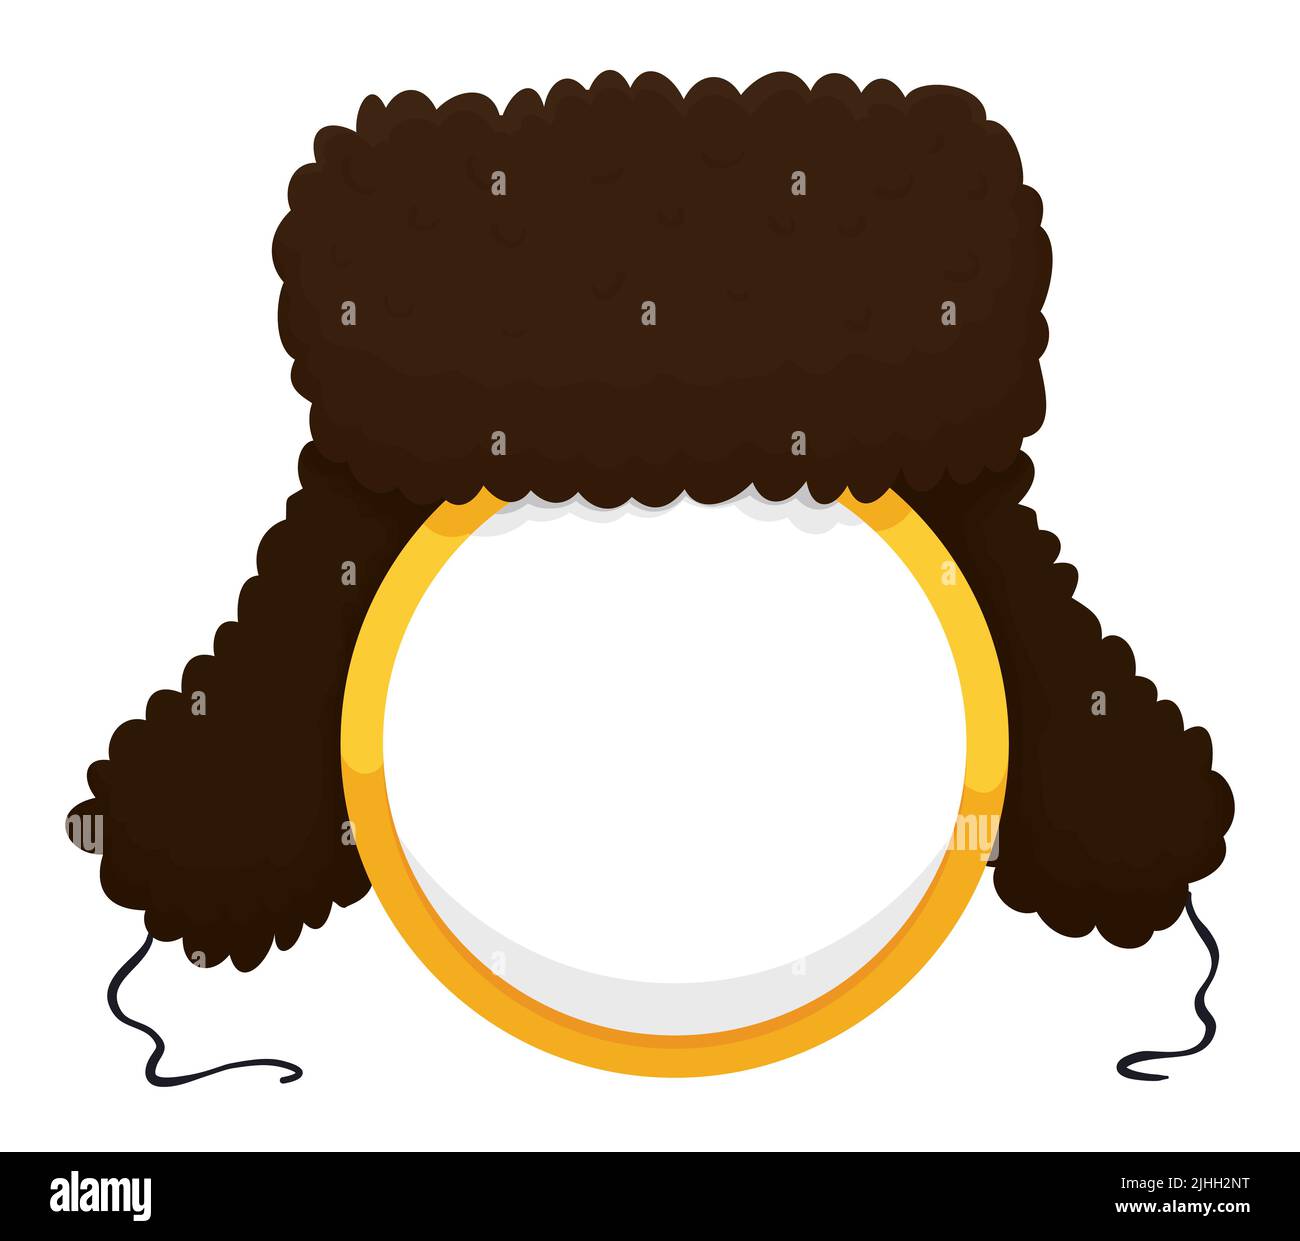 Traditional Russian ushanka hat with brown fur on the top of golden button template. Design in cartoon style over white background. Stock Vector